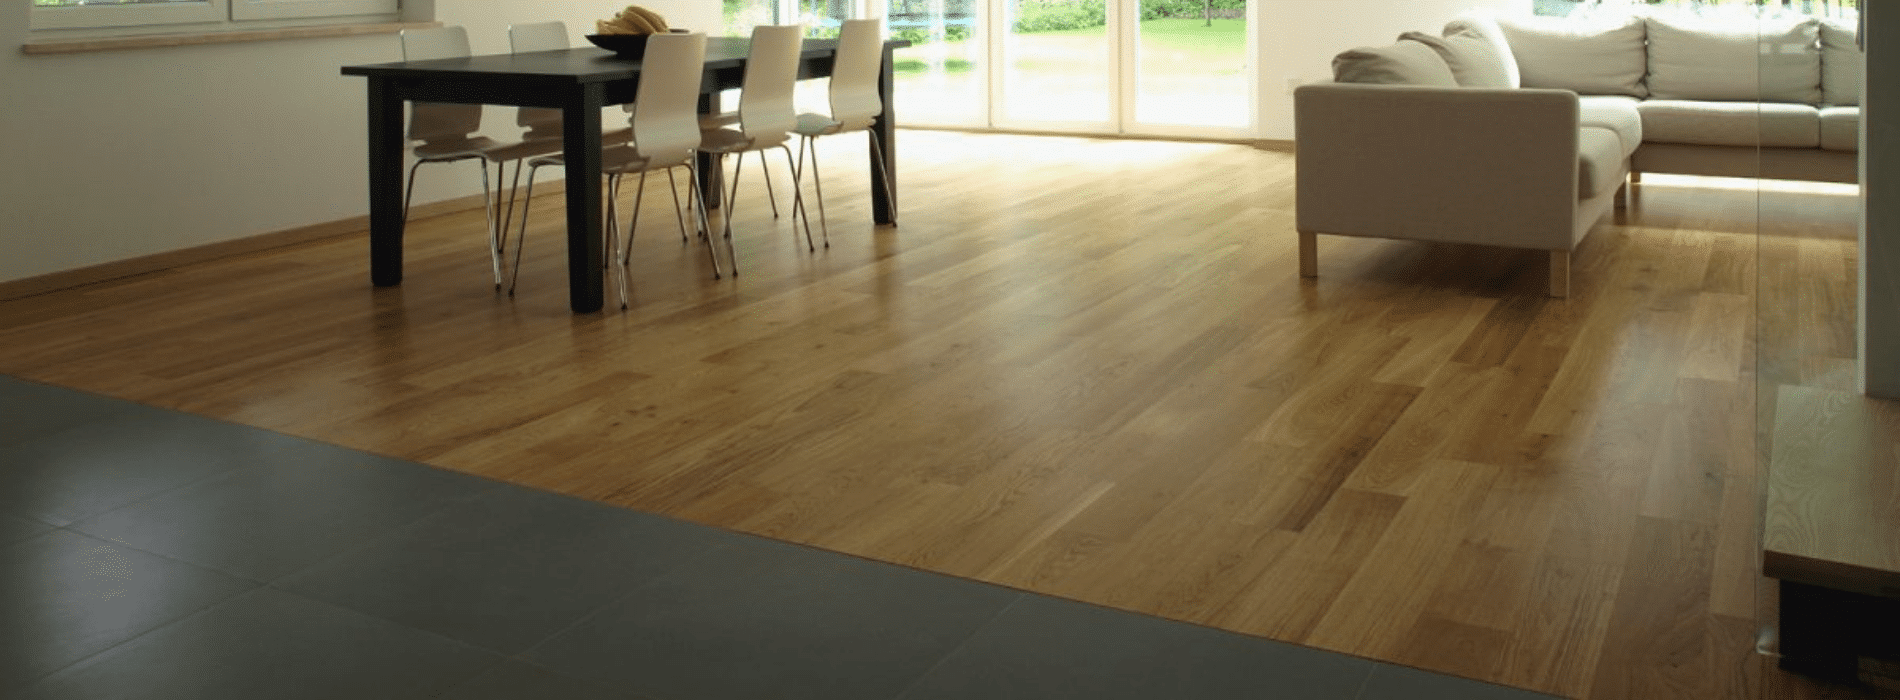 Expertly restored 6-year-old hardwood floor in Chelsea, SW3. Mr Sander® used Bona 2K Frost whitewashing and Traffic HD 15% sheen matte lacquer. Durable and stunning, this finish guarantees long-lasting beauty. 